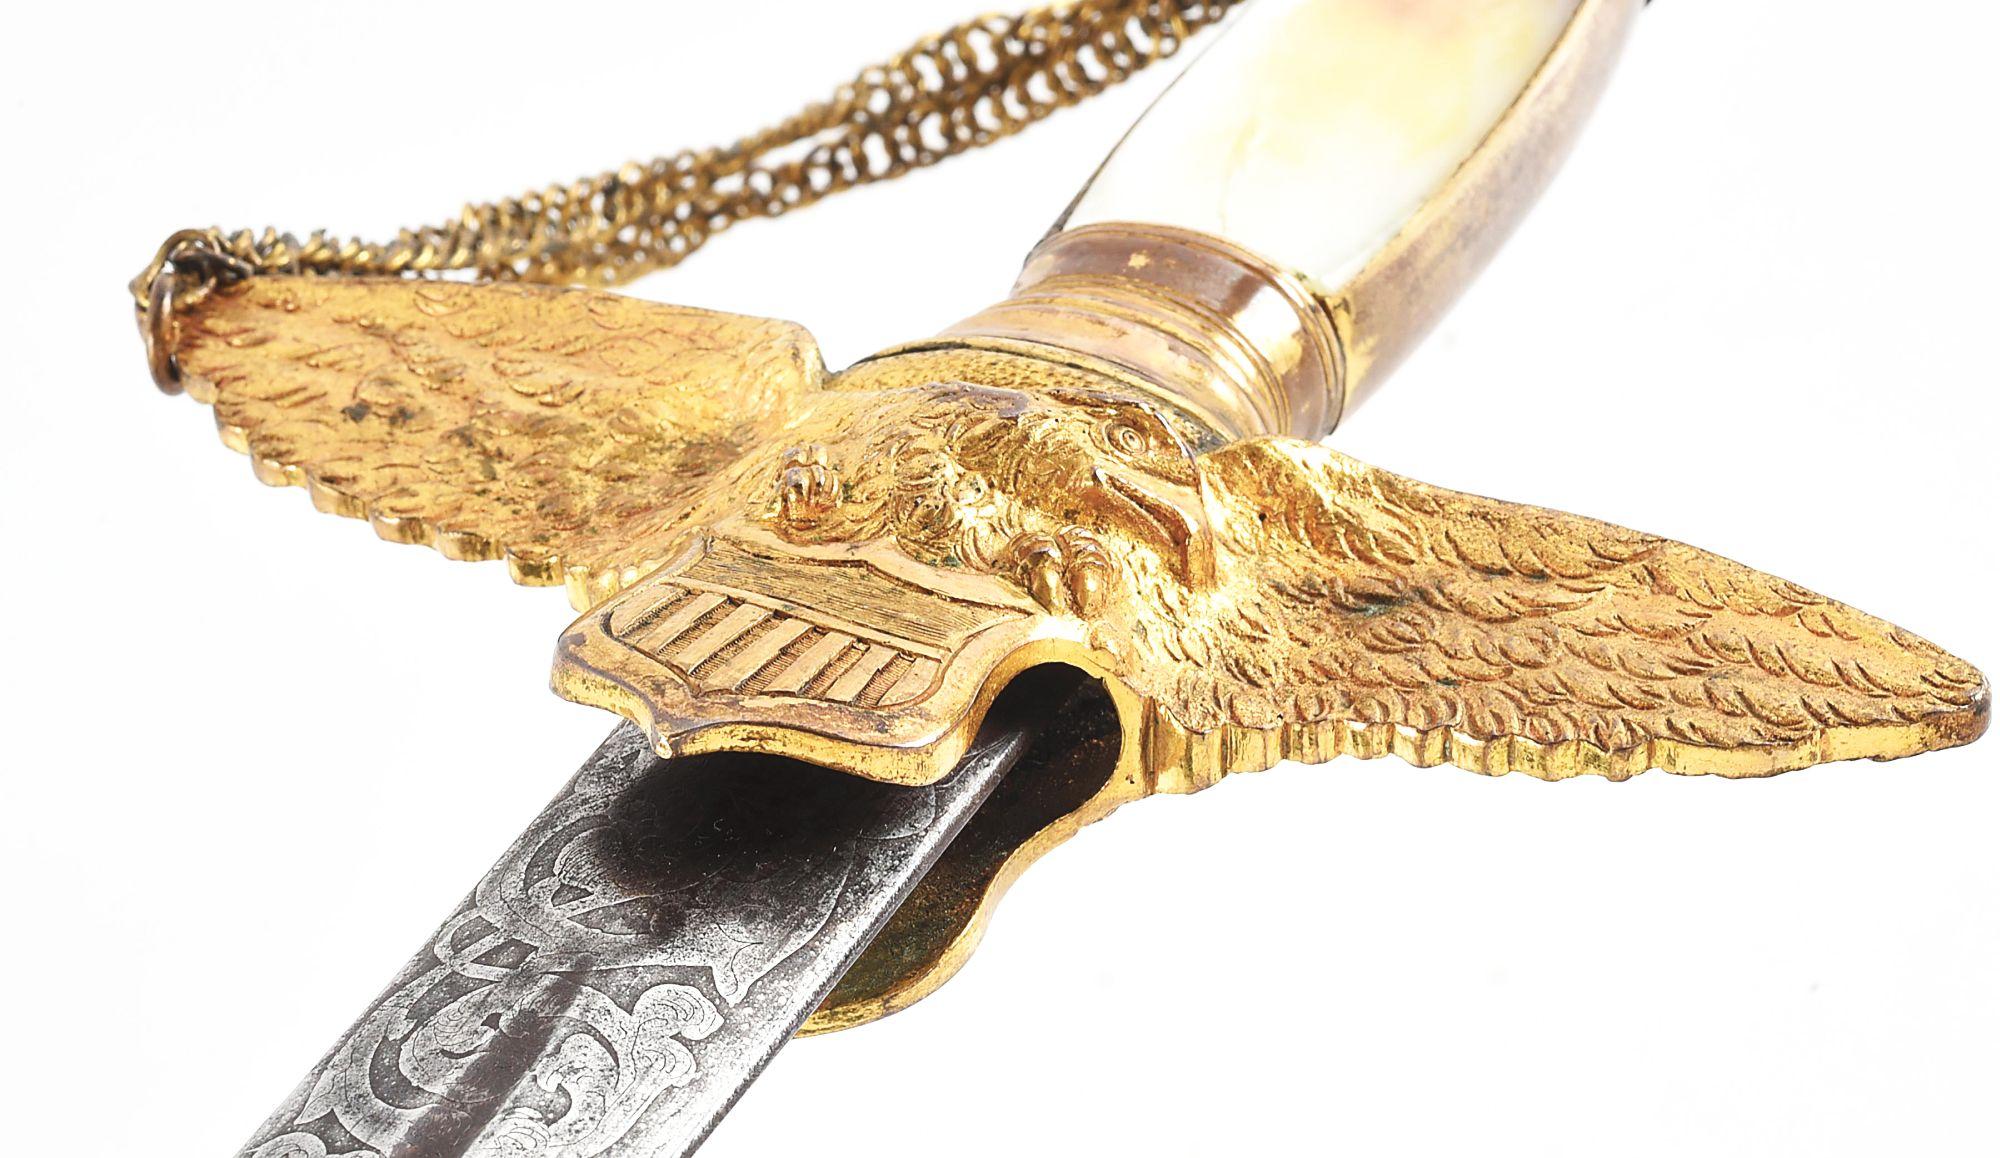 US FEDERAL PERIOD 1834-1840 PATTERN MILITIA OFFICER'S SWORD.